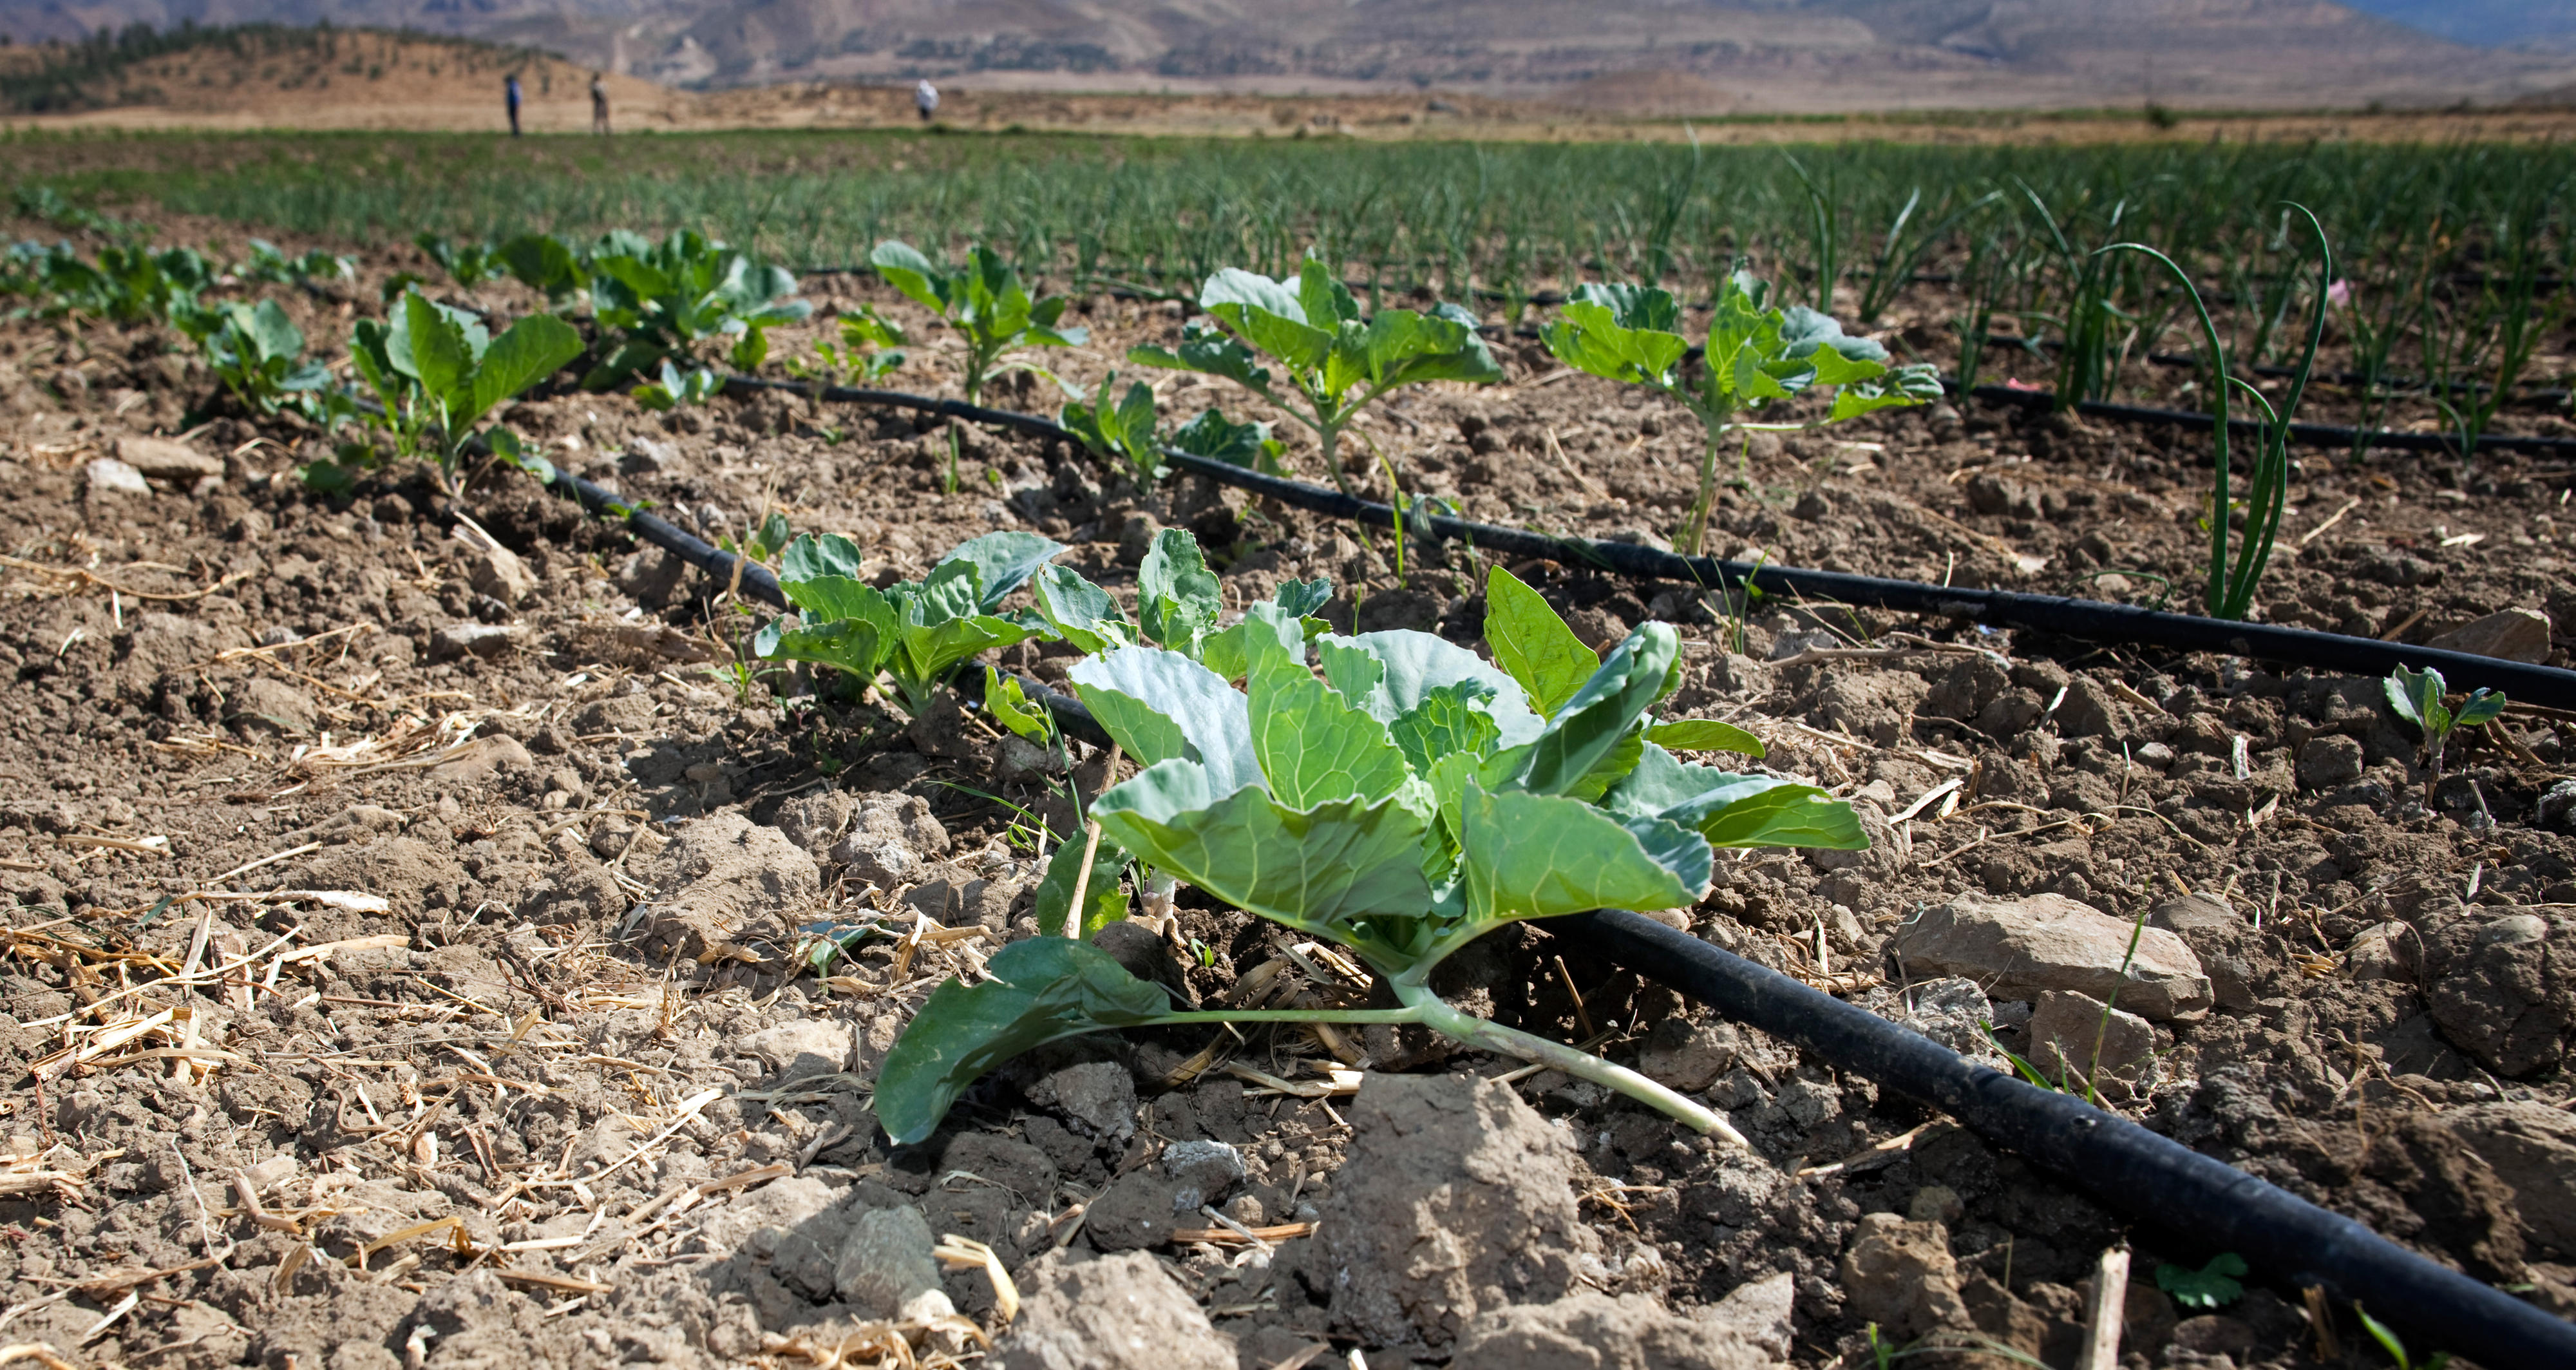 Drip irrigation on a field in Ethiopia